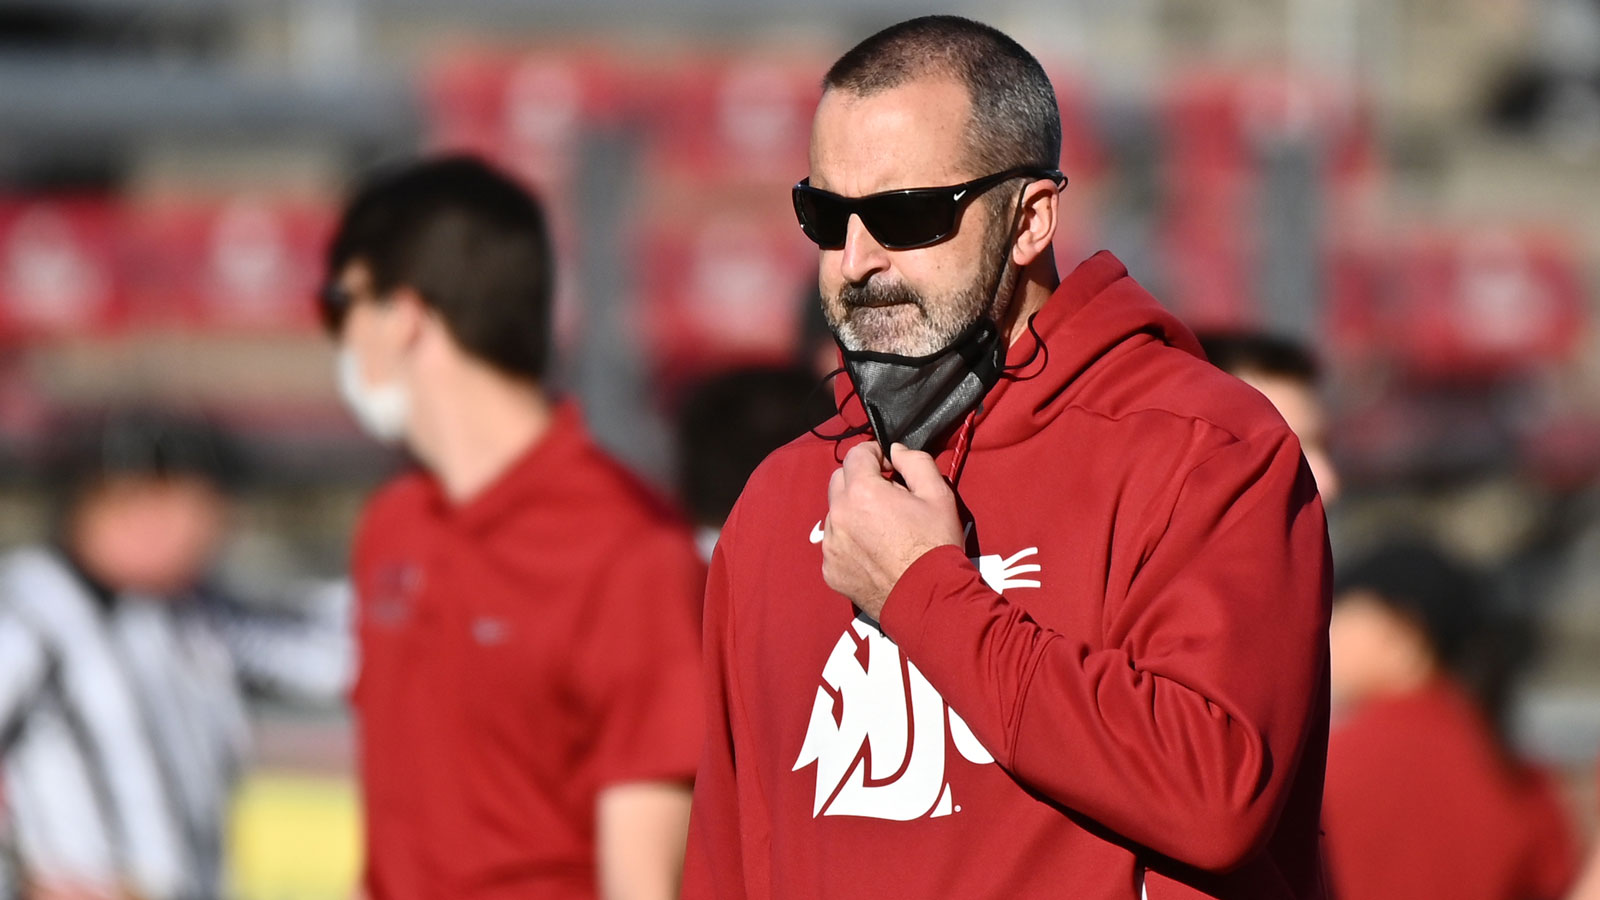 Washington State Coach Rolovich Fired for Failing to Get COVID-19 Vaccine